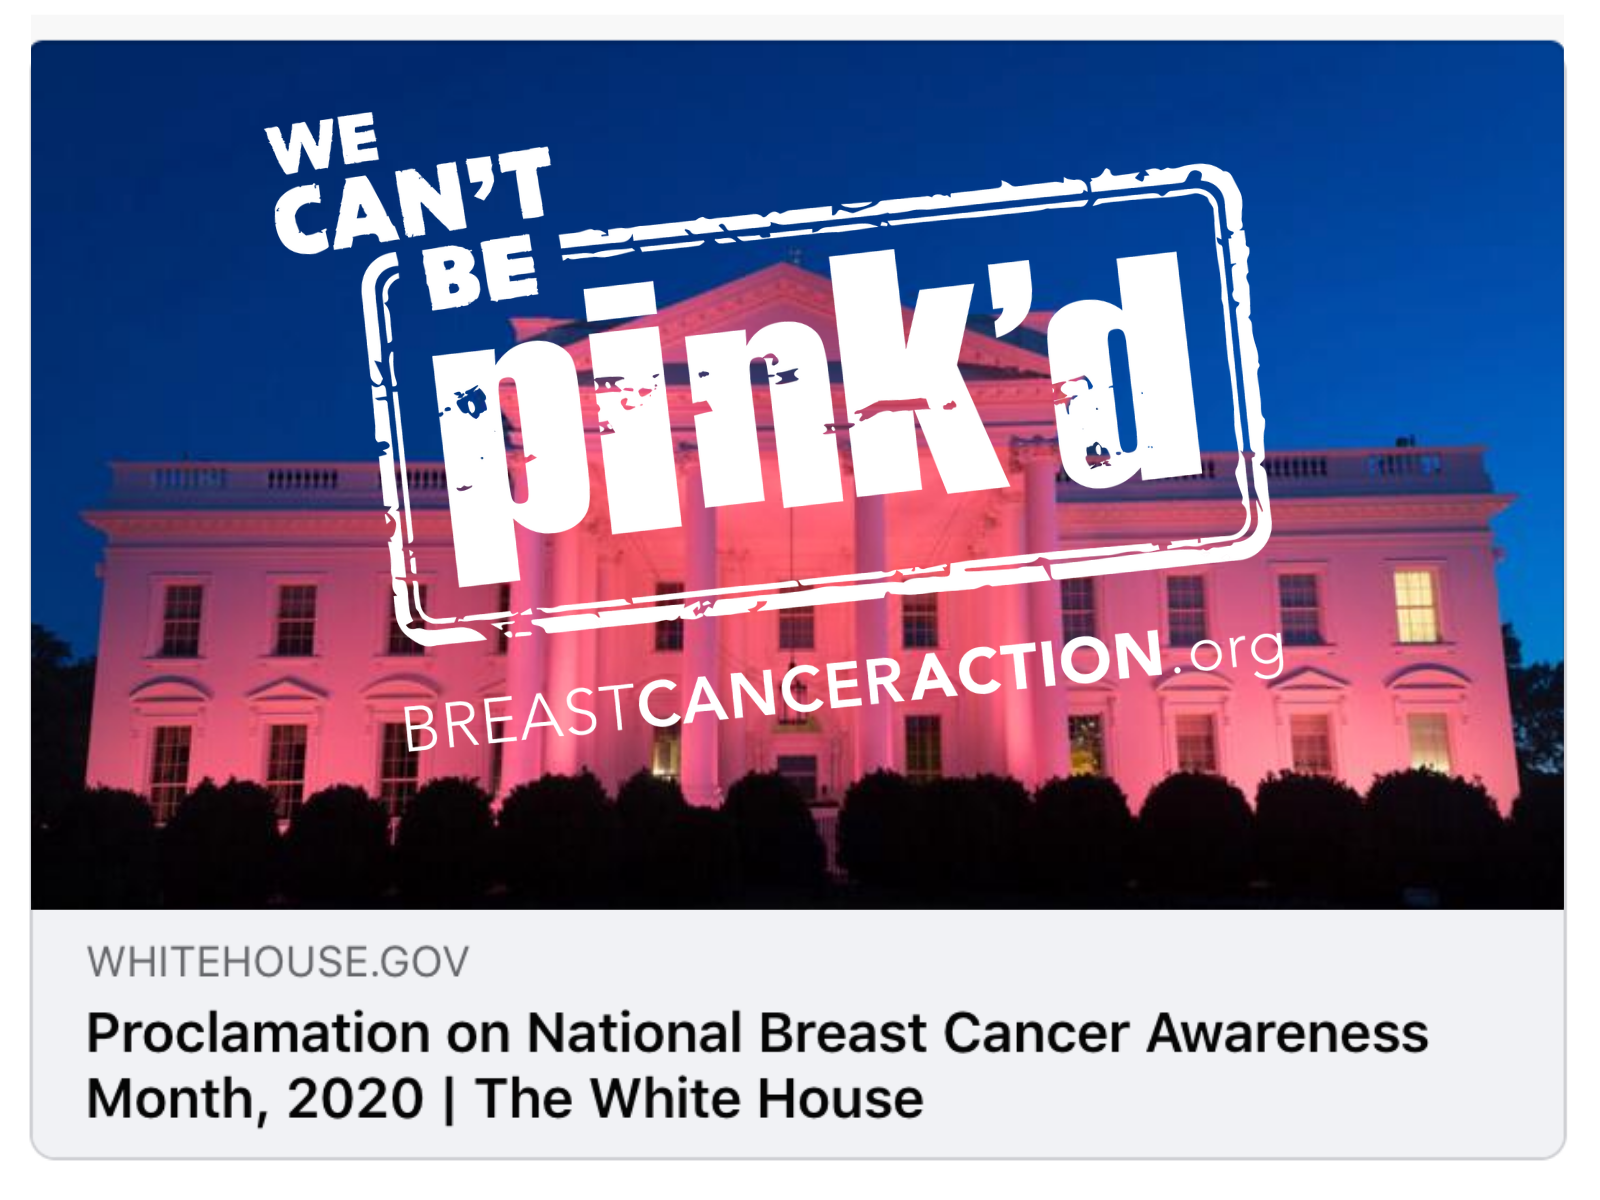 The Presidental Proclamation Image with the Think Before You Pink stamp stamped over it